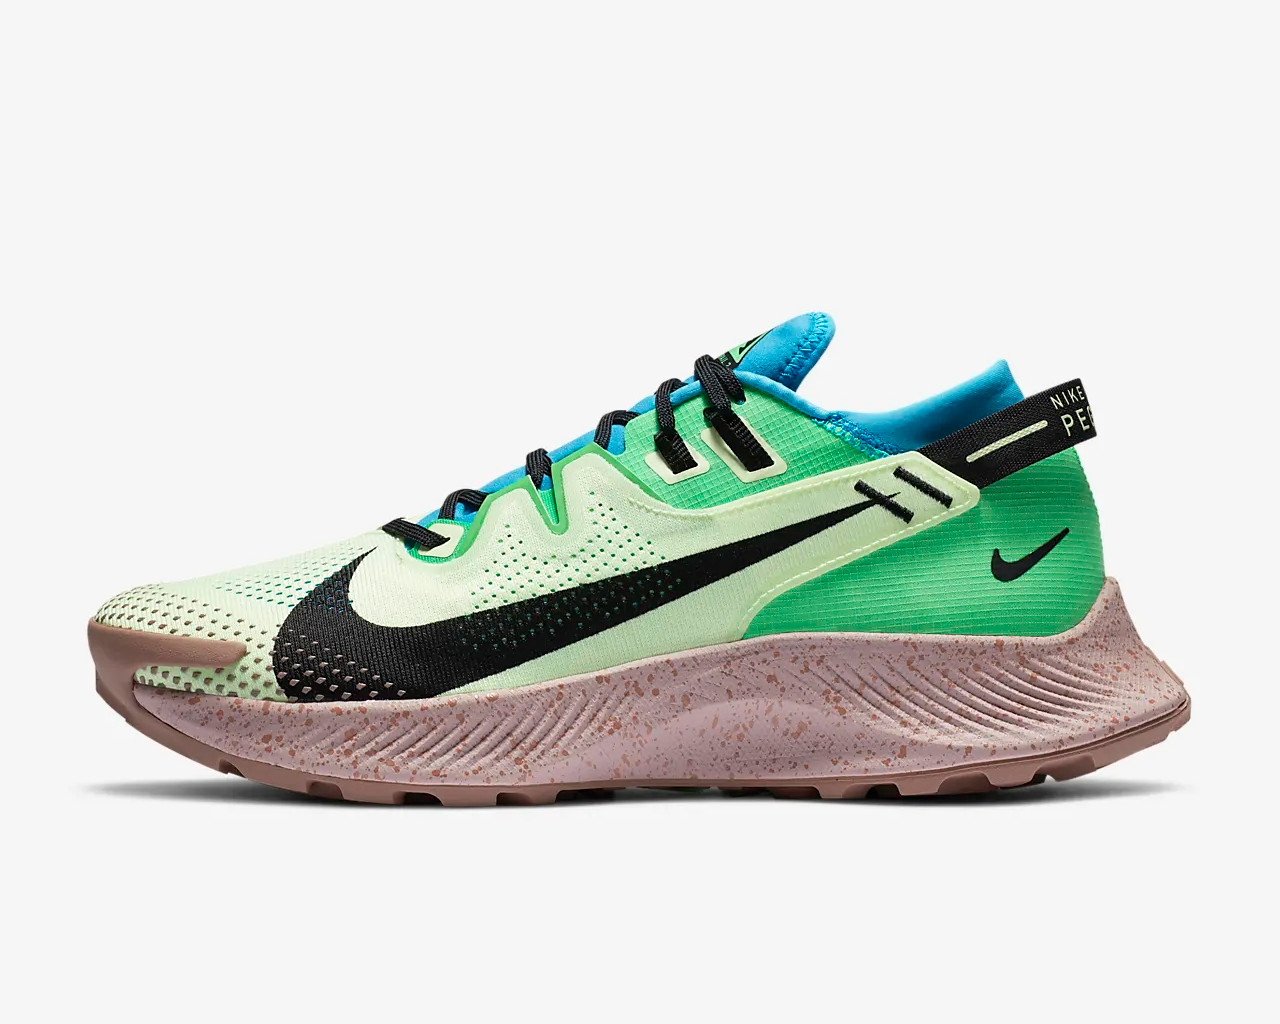 Ortografía A tiempo aprender Nike Zoom Pegasus Trail 2 Barely Volt Poison Green Black CK4305 - RvceShops  - 700 - nike air force 1 pivot black and gold background